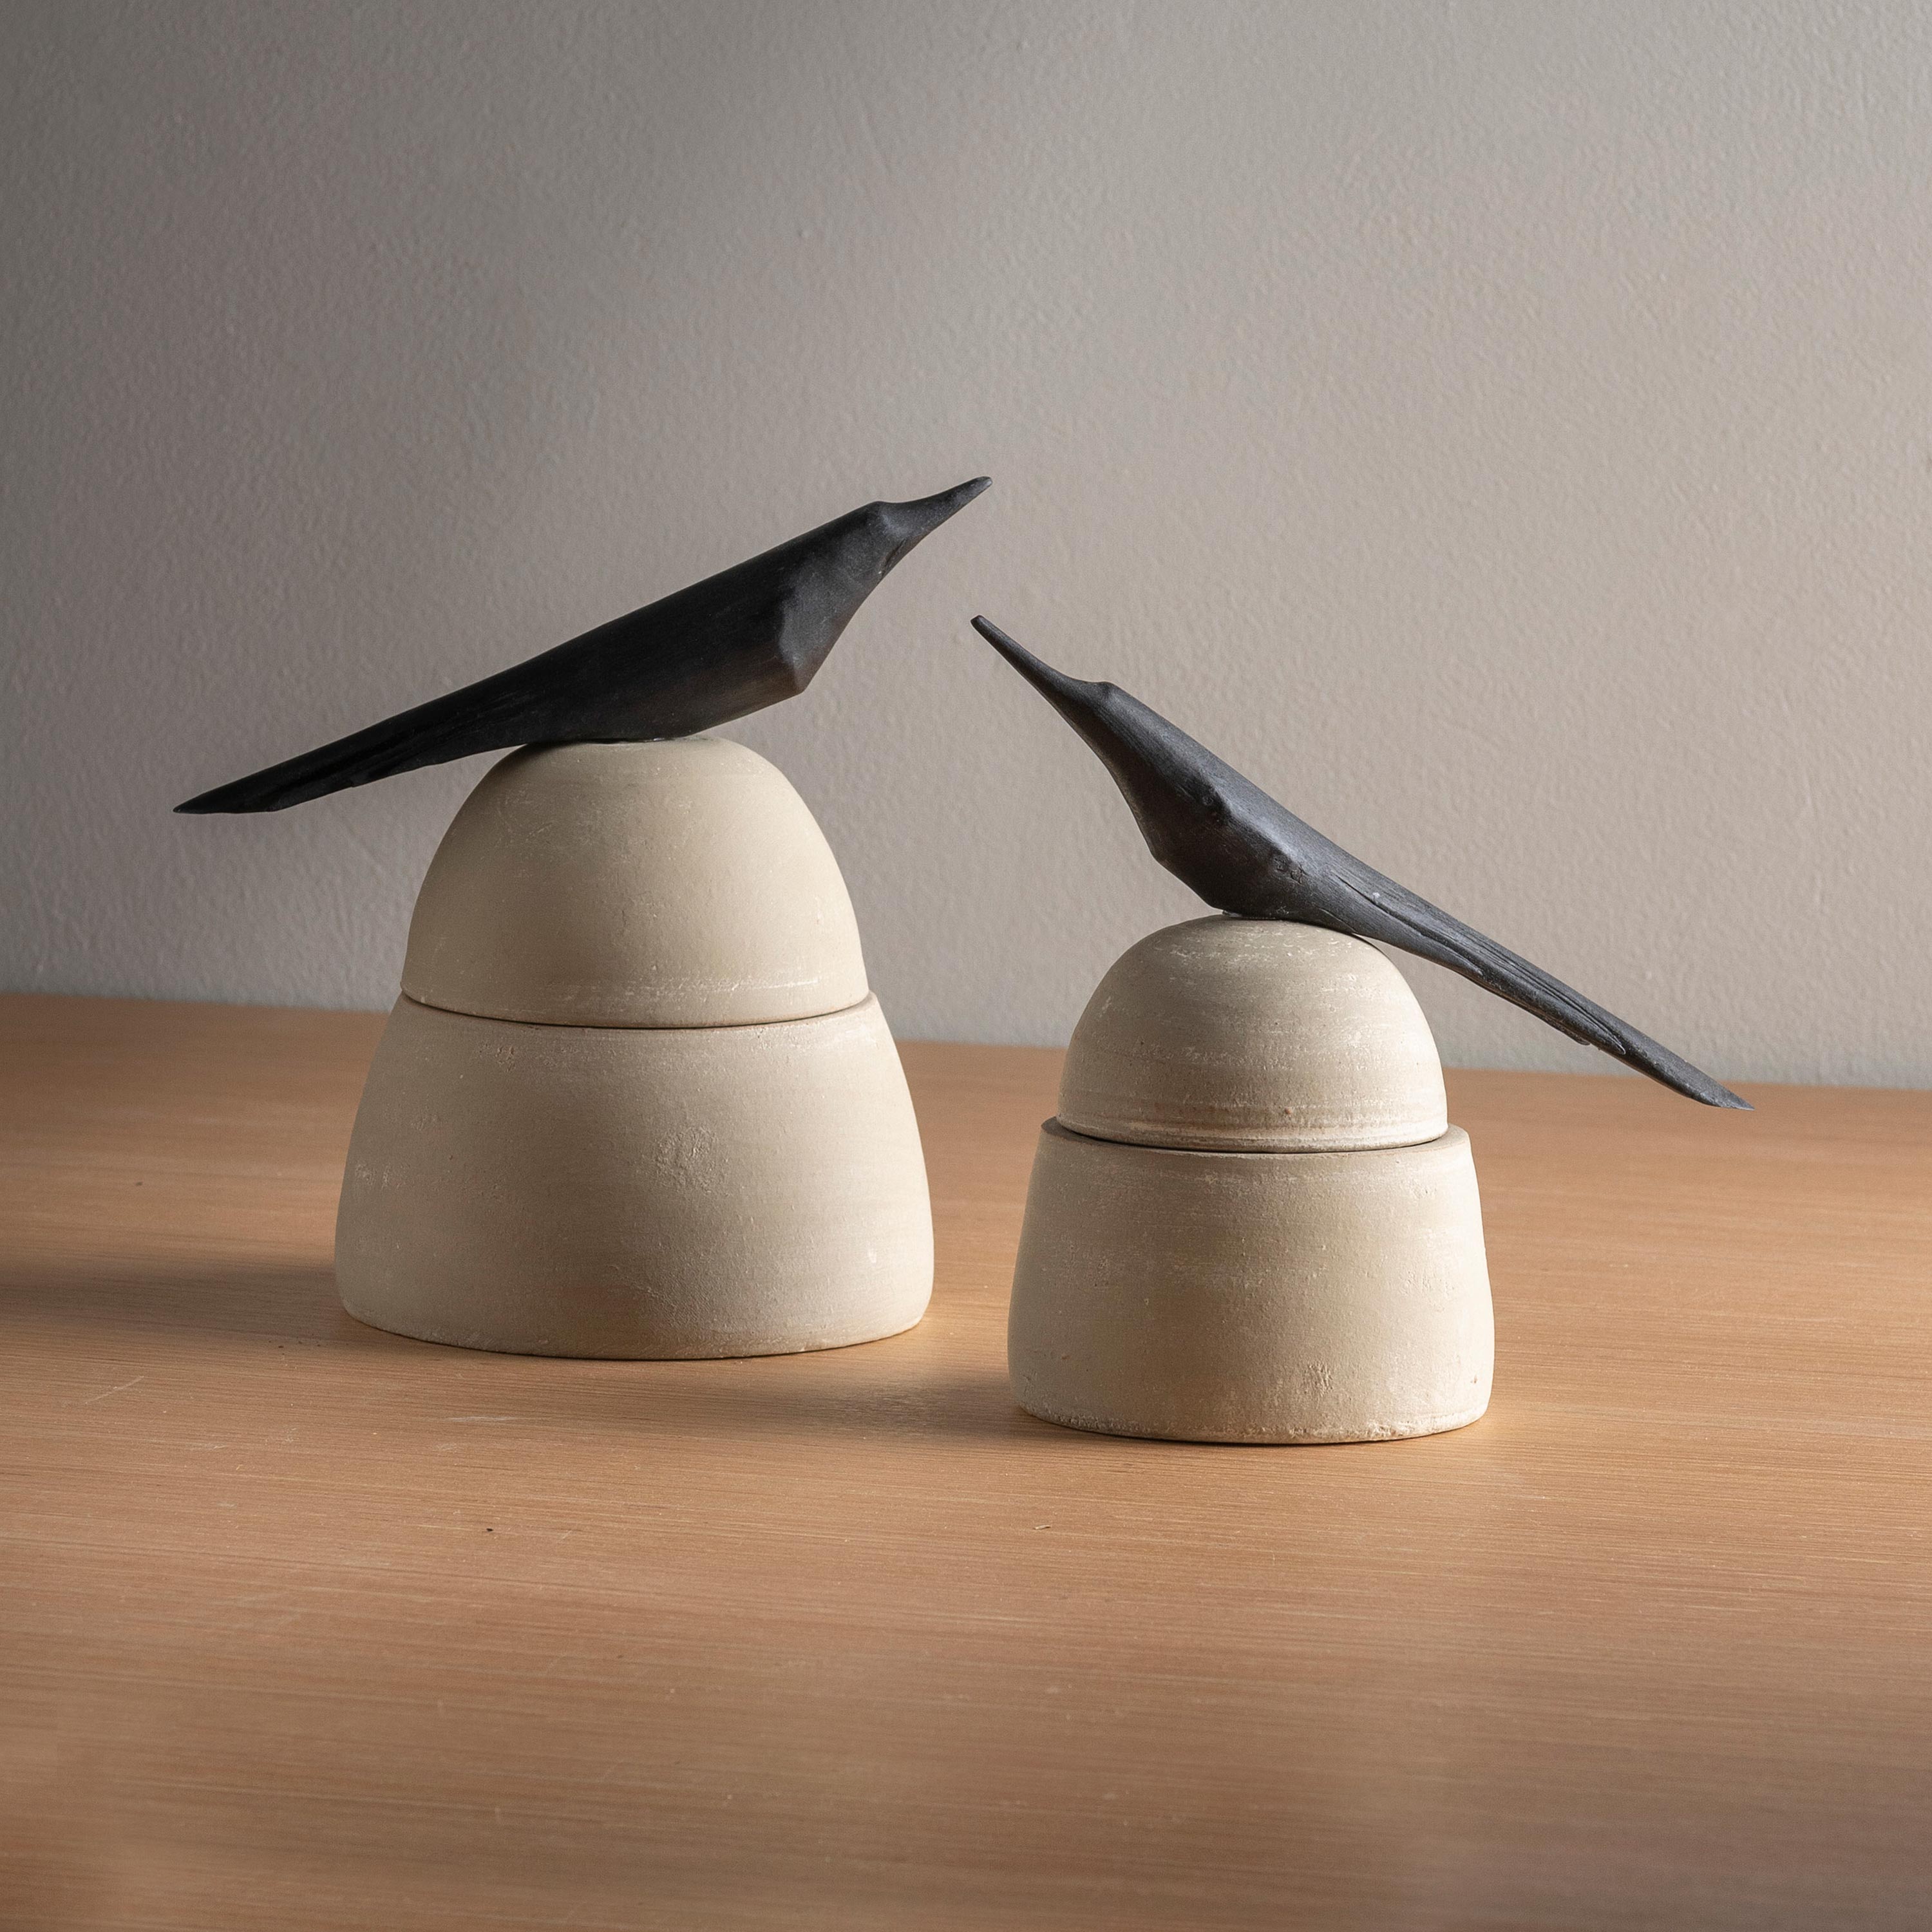 Raven Lidded Containers, Set of 2